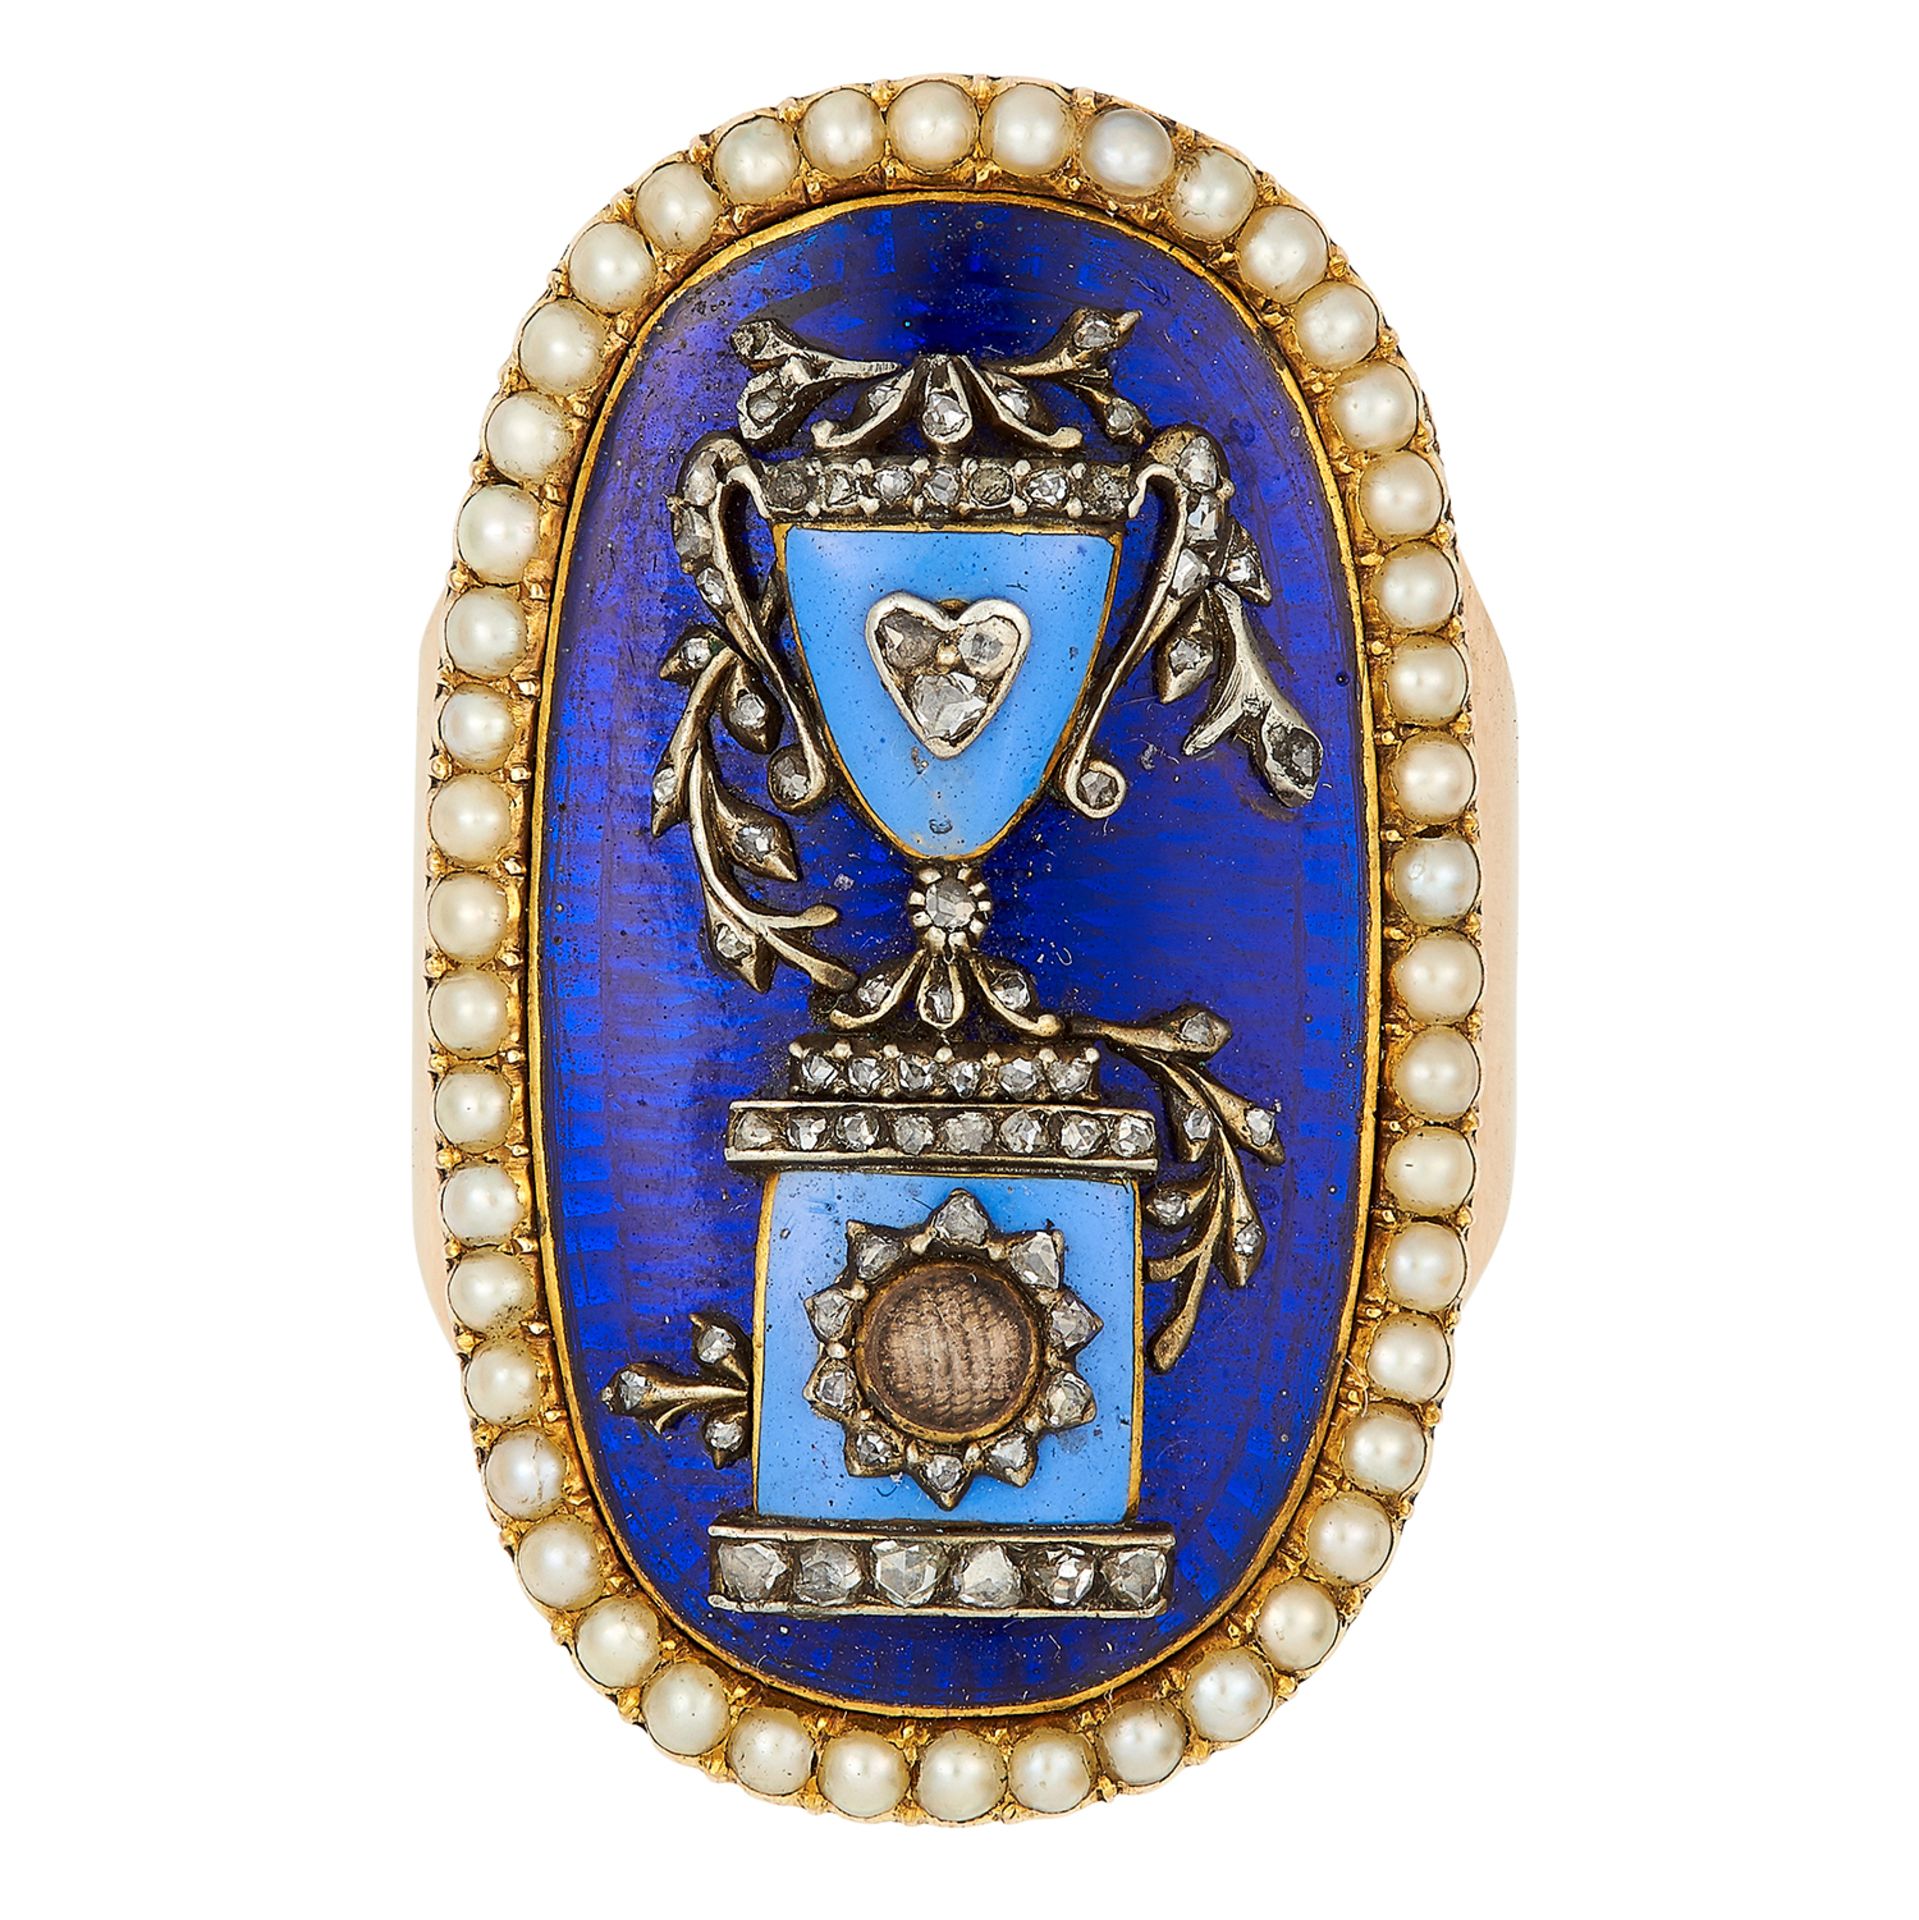 ANTIQUE ENAMEL, DIAMOND AND PEARL HAIRWORK MOURNING RING in yellow gold, set with blue enamel,